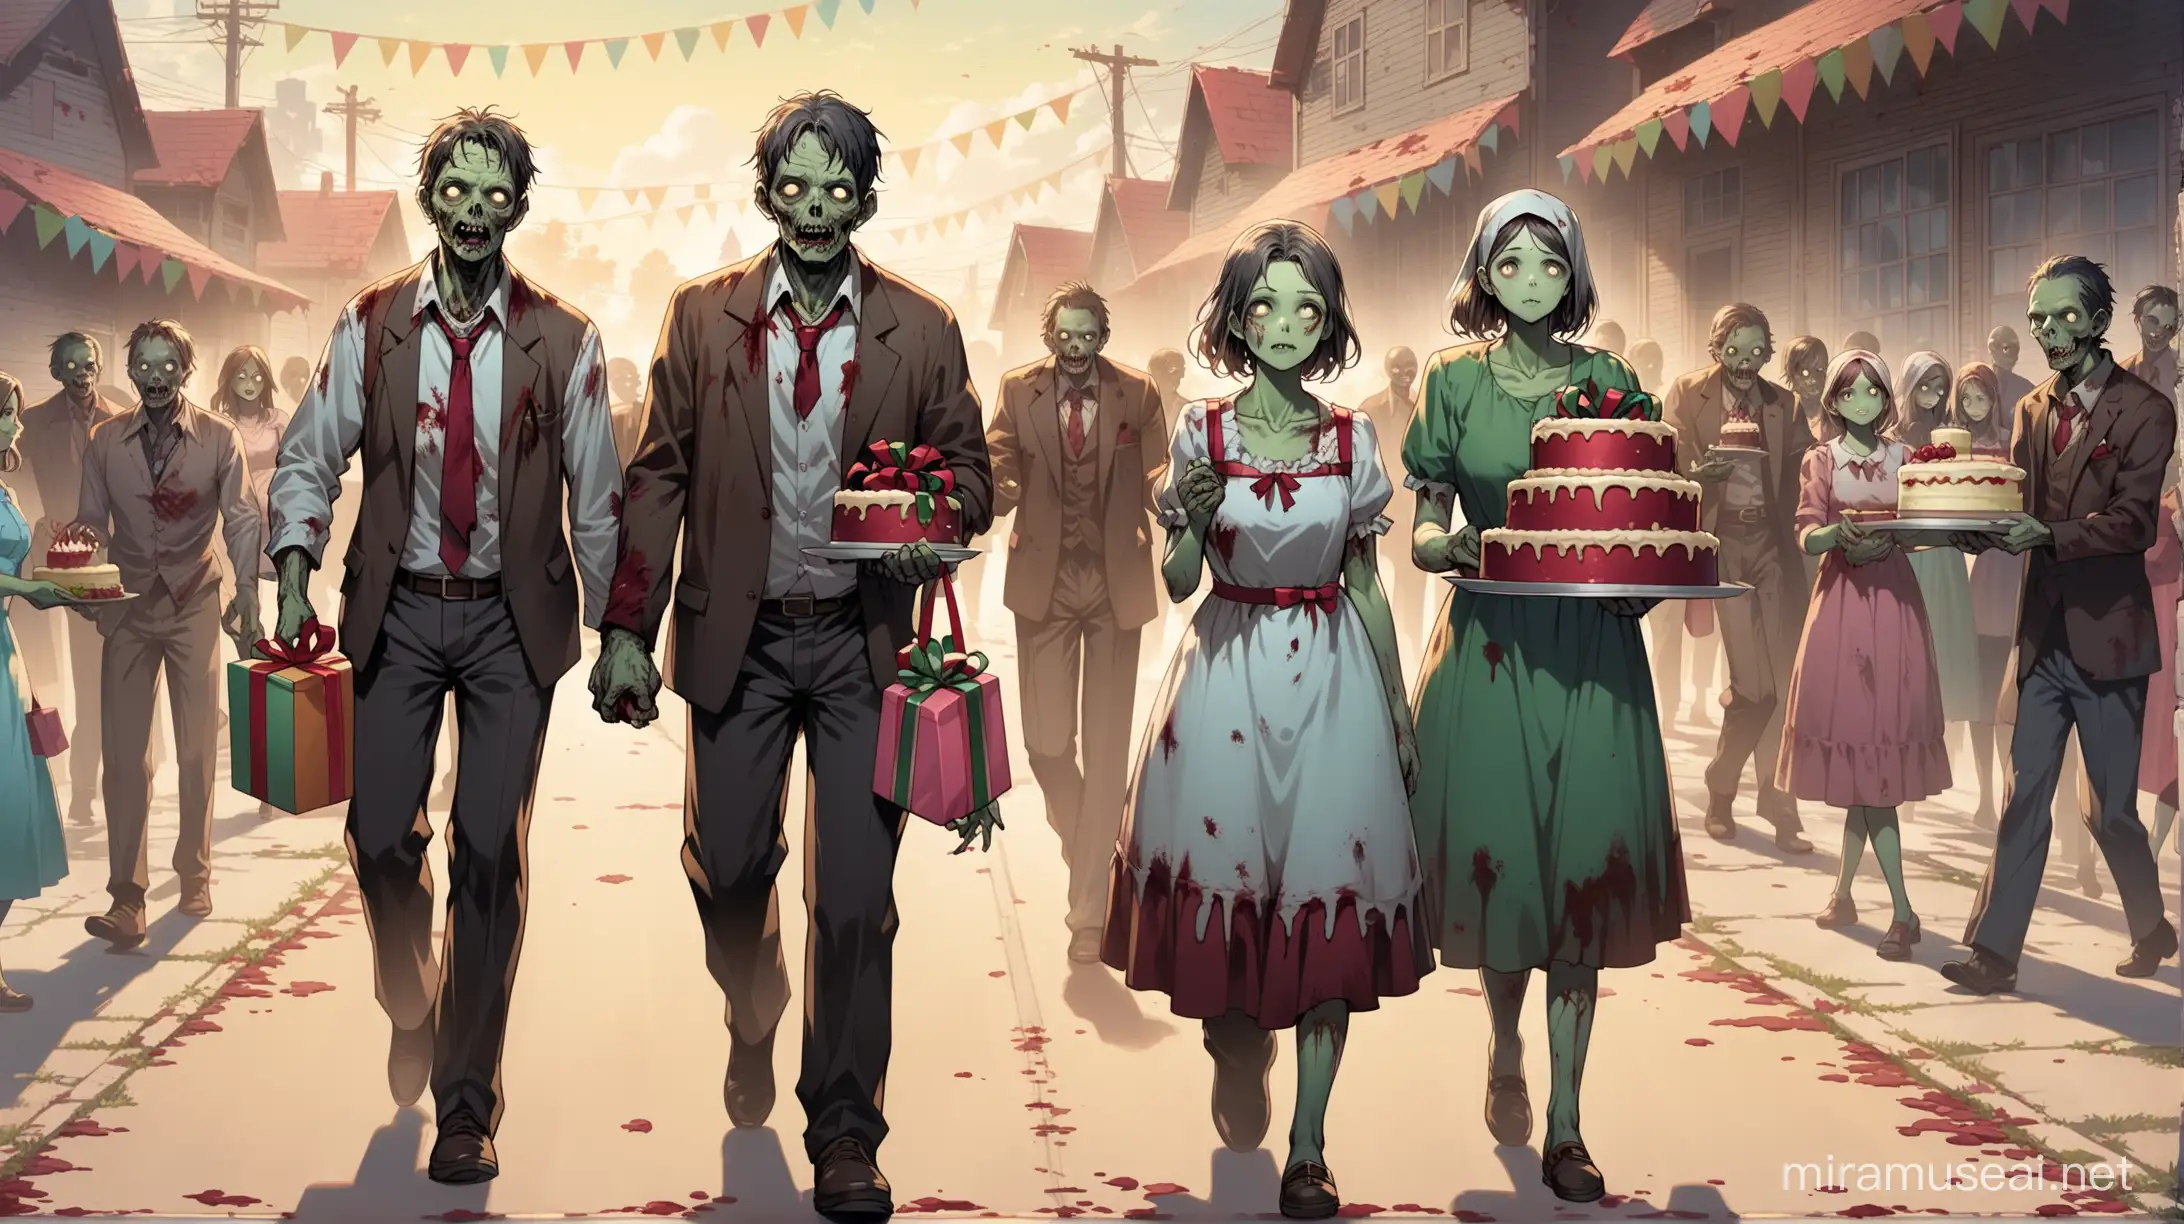 Diverse Zombie Parade Heading to Celebration with Gifts and Cake